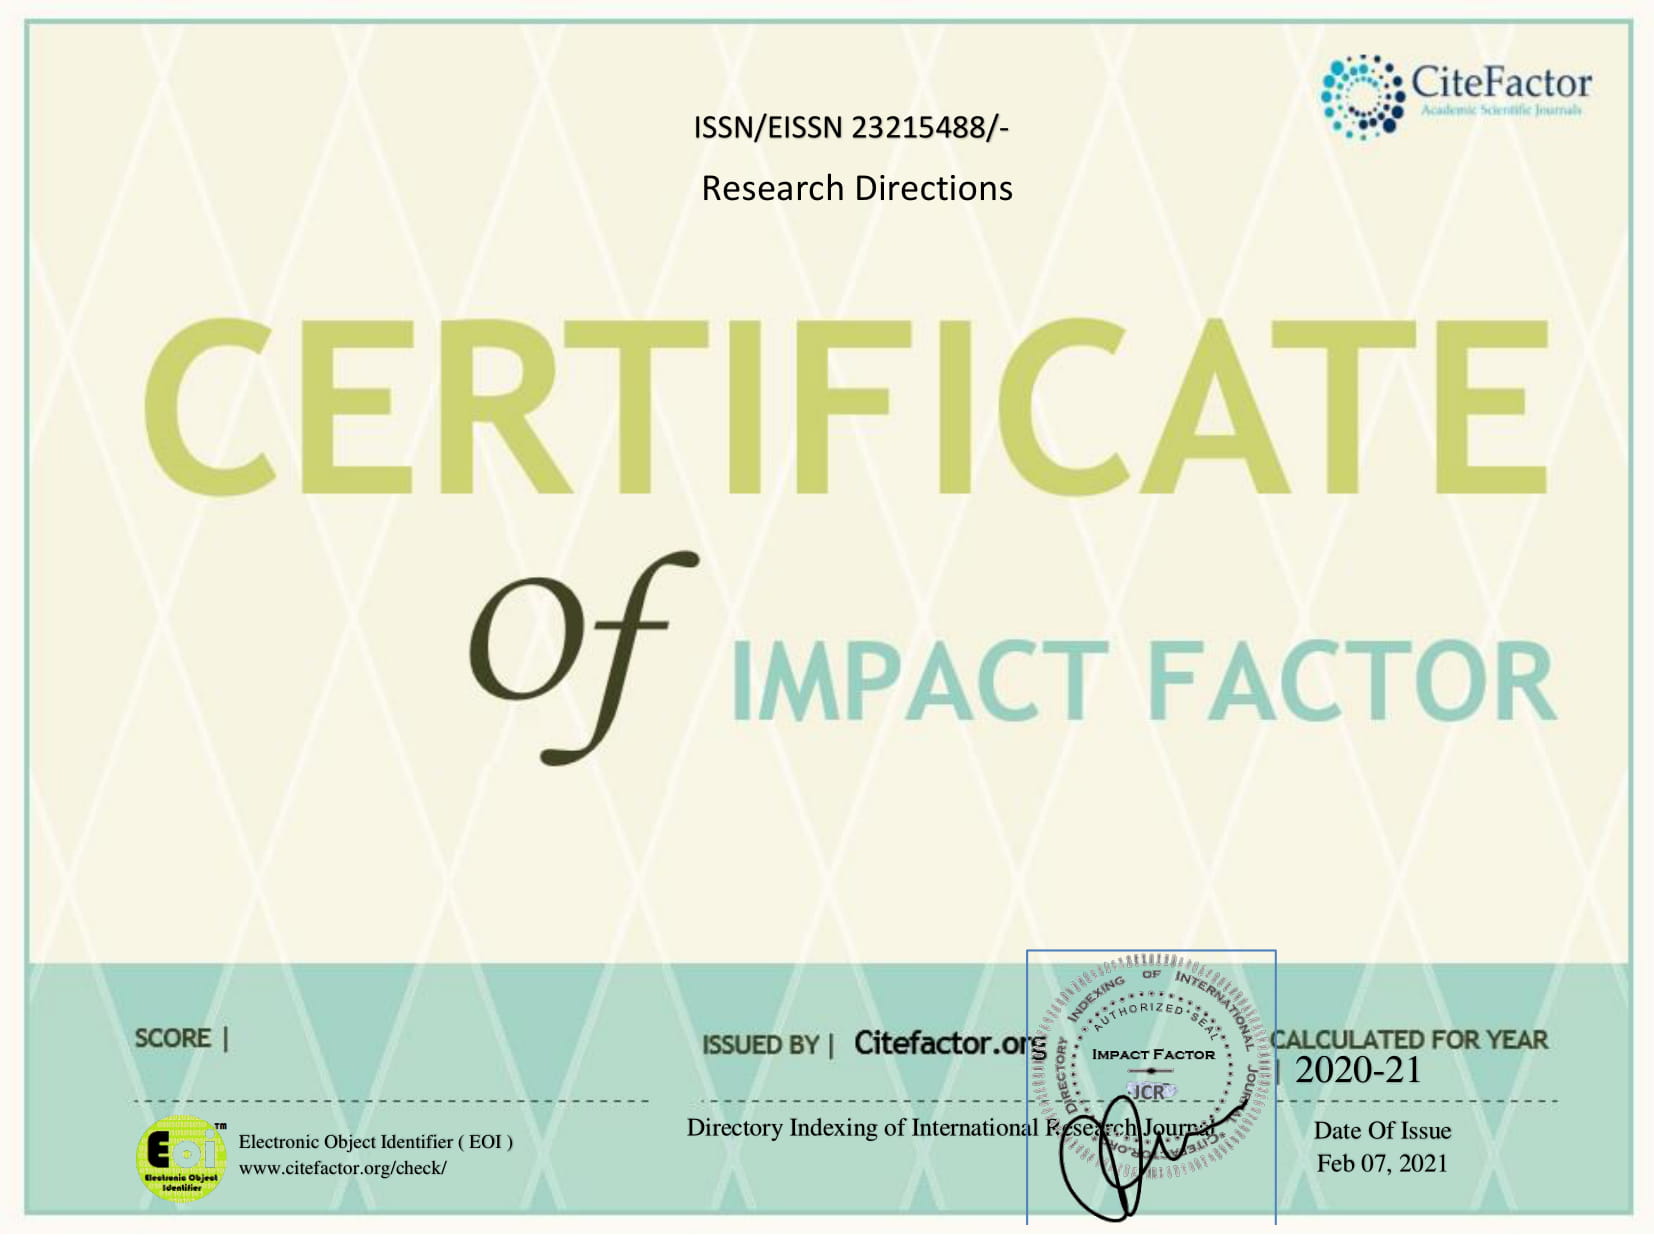 Cite Factor Certificate - Research-Directions